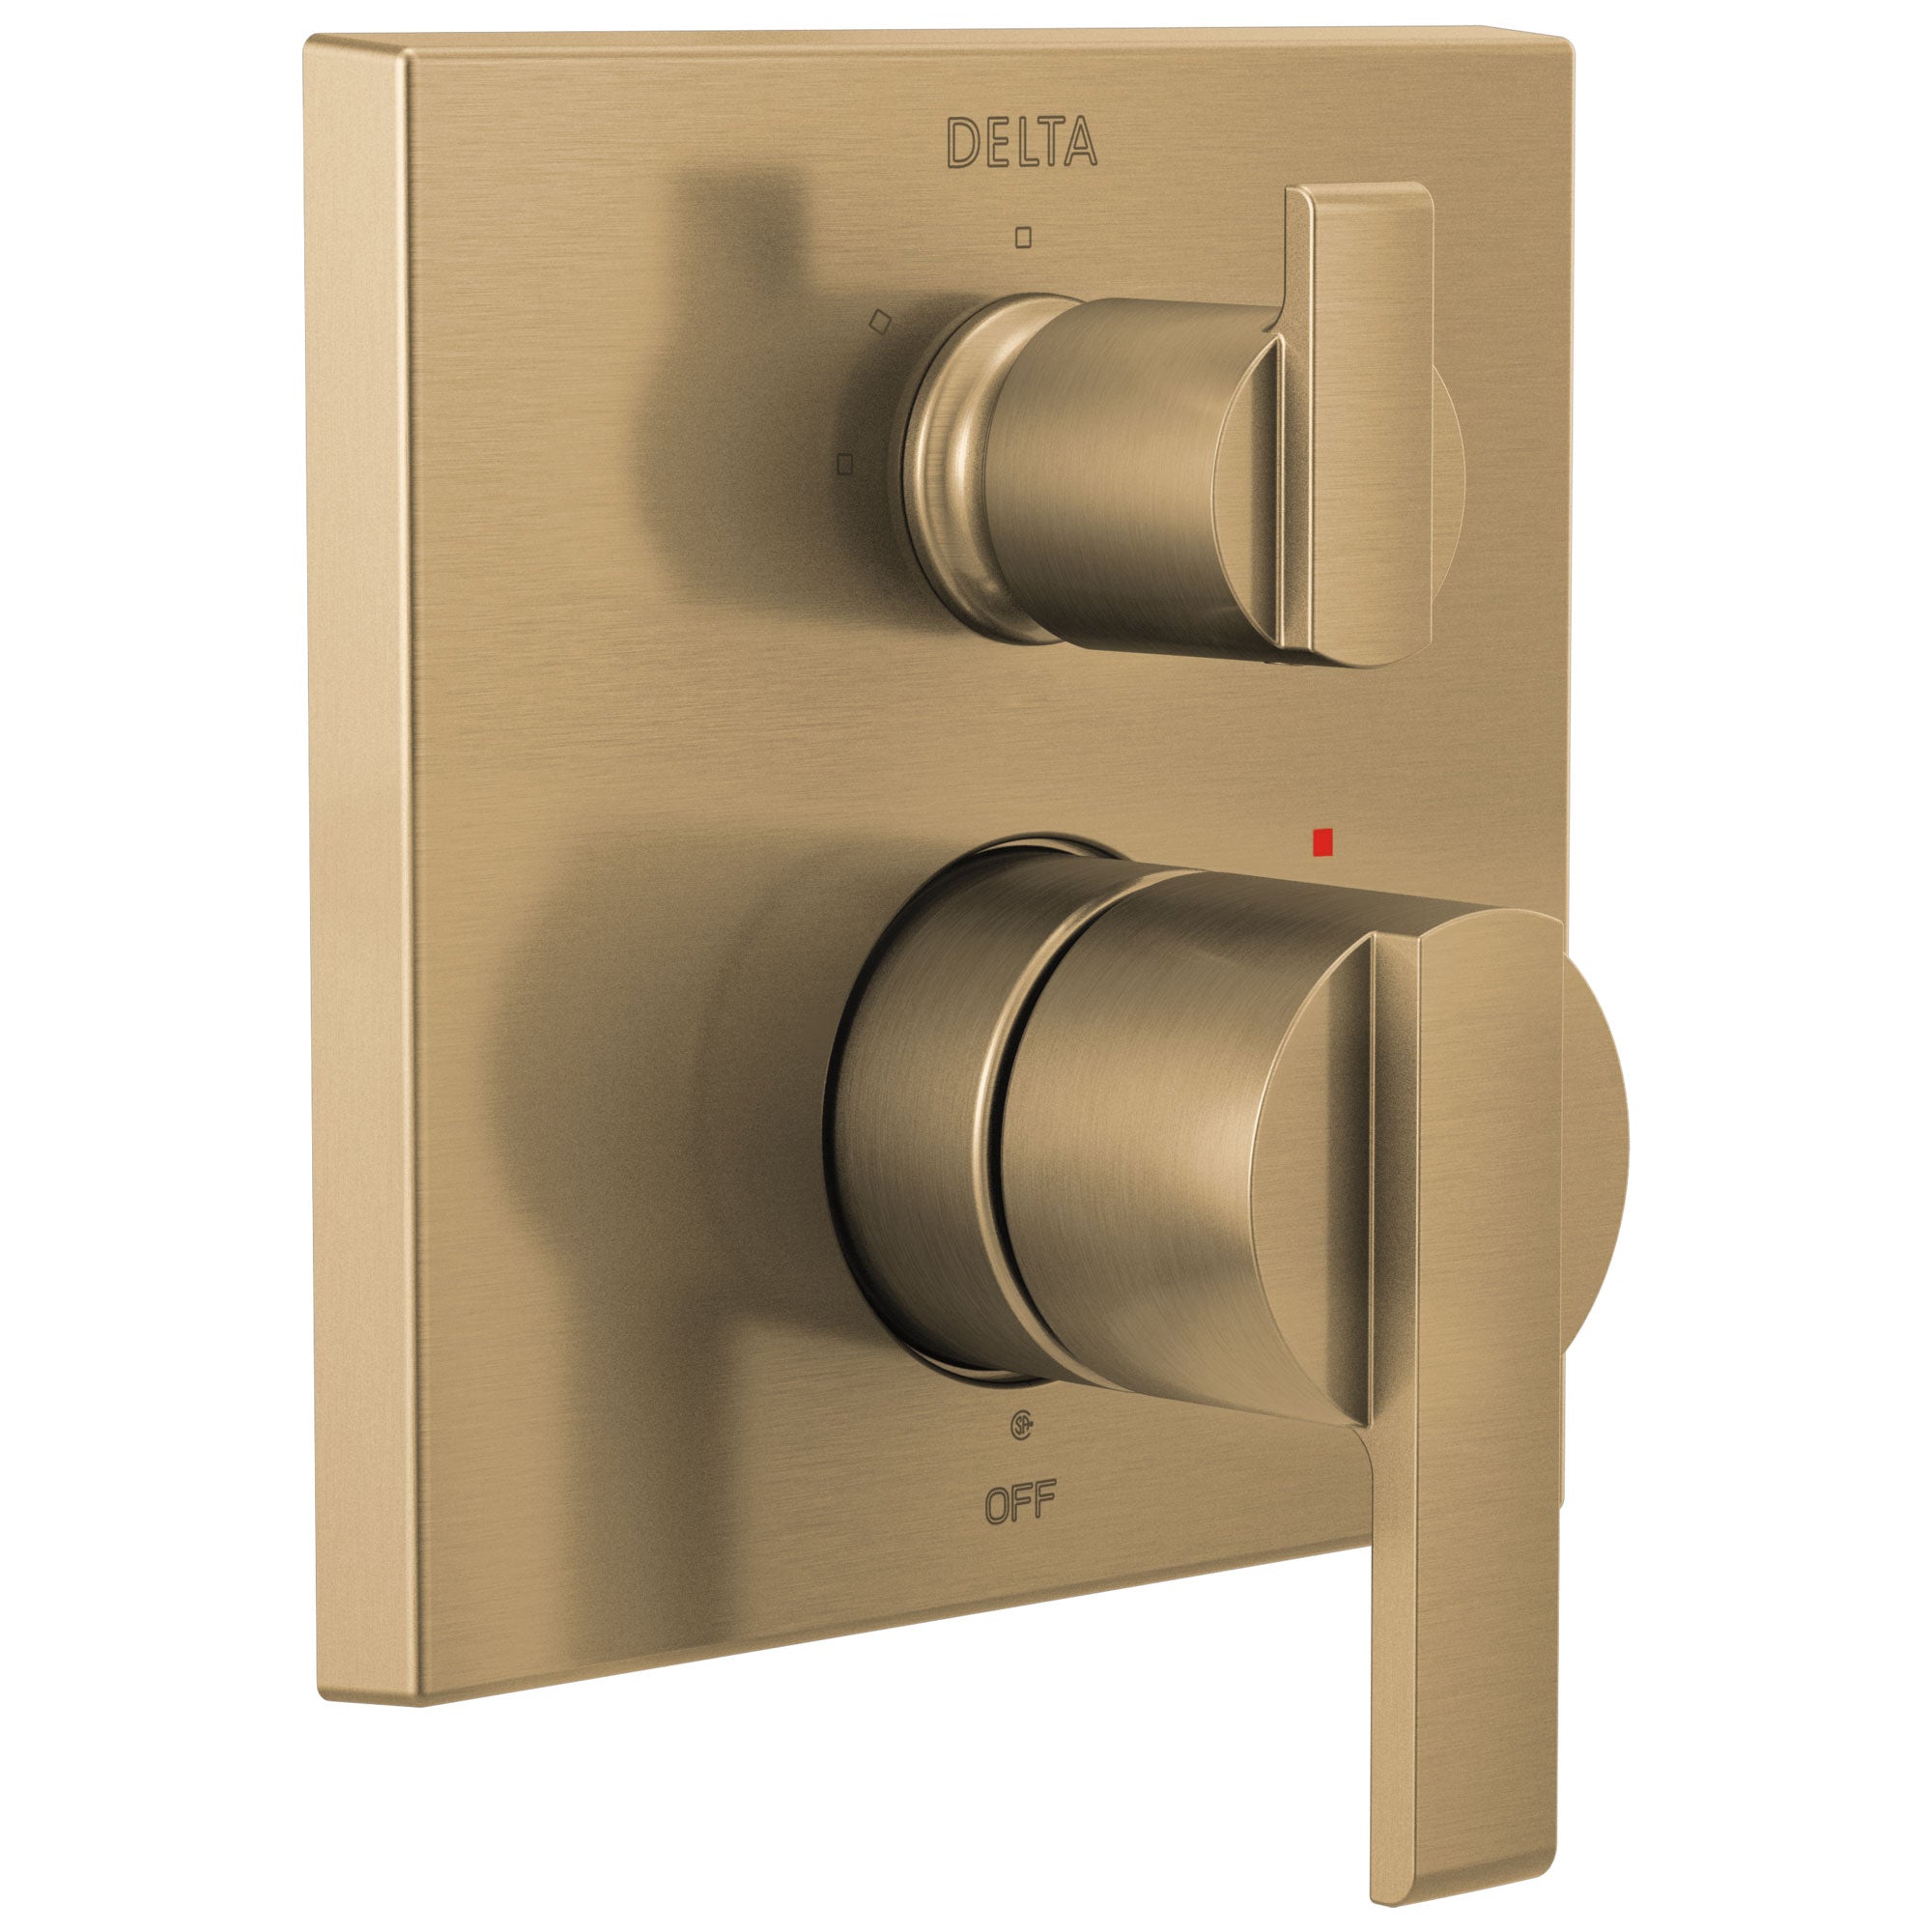 Delta Ara Champagne Bronze Finish Angular Modern 14 Series Shower System Control with 3-Setting Integrated Diverter Includes Valve and Handles D3205V